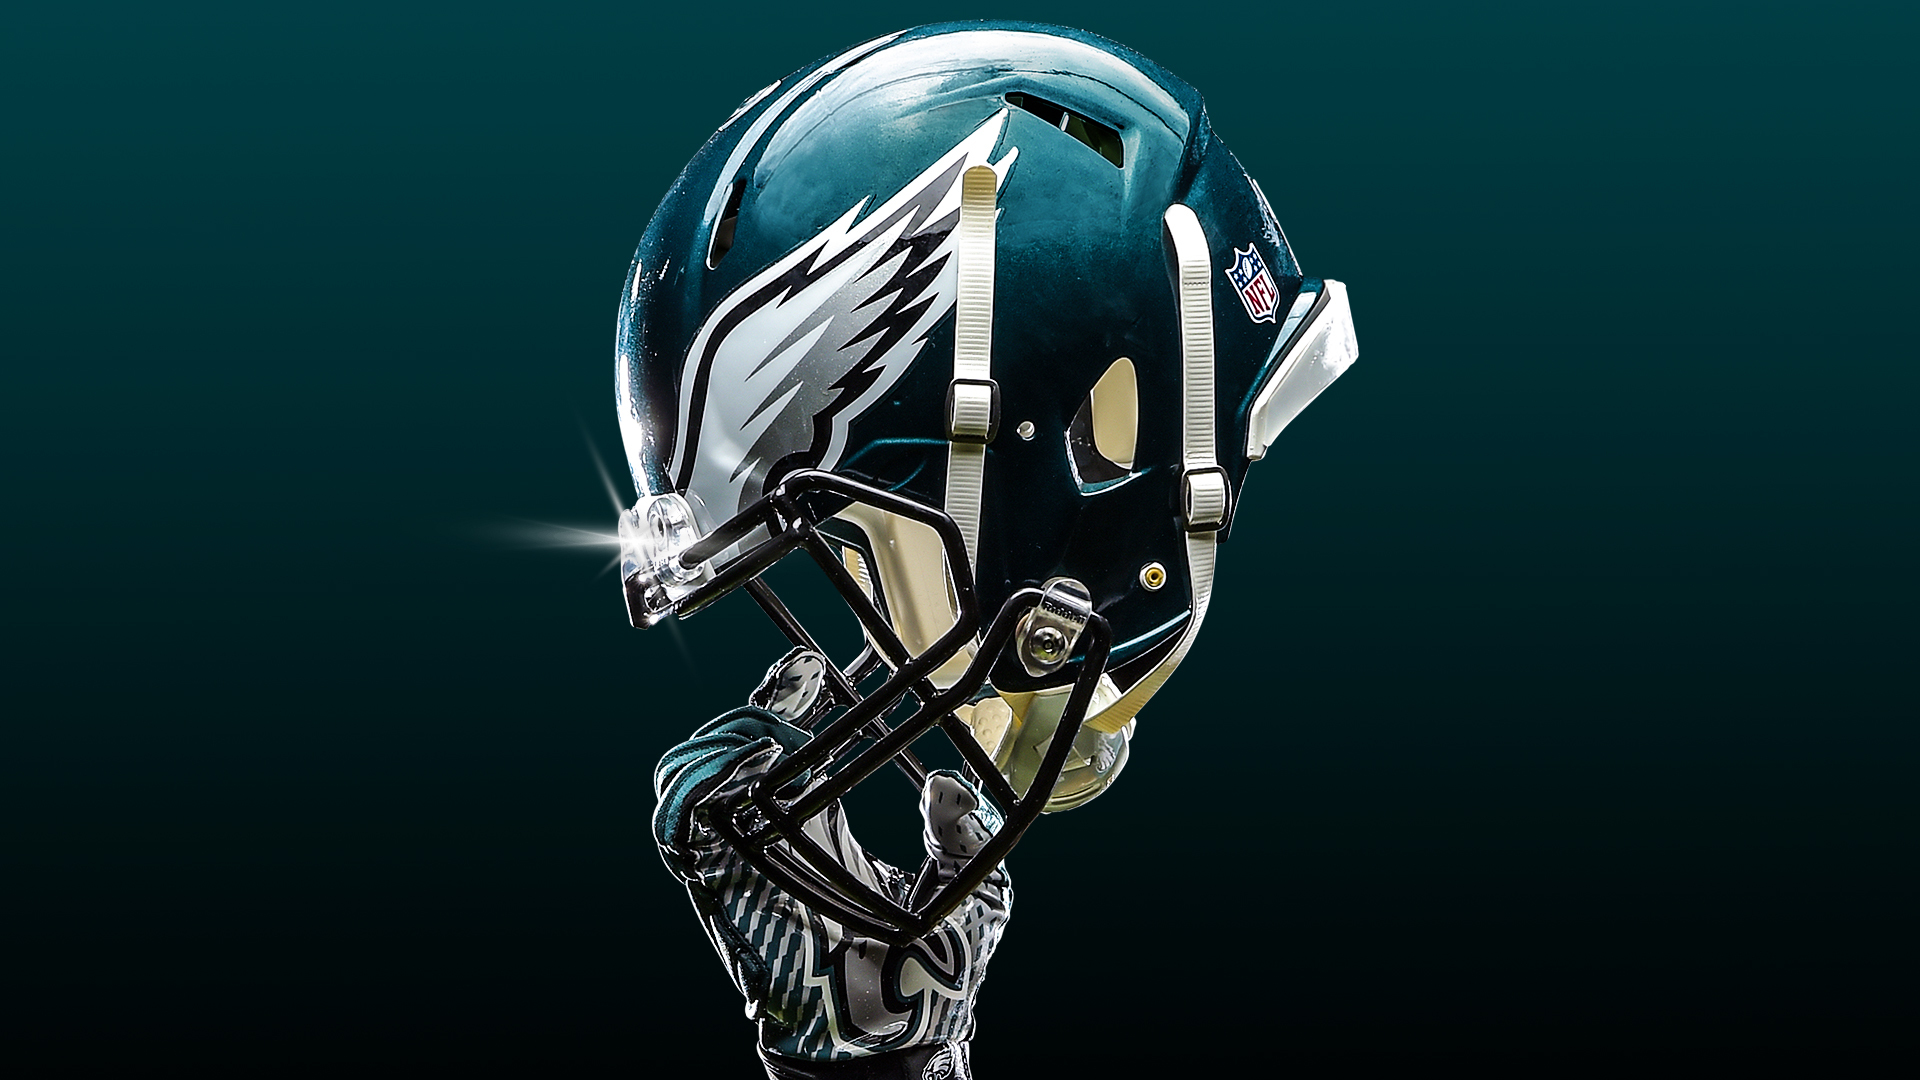 Download These Eagles Themed Zoom Backgrounds To Add A Little Fly Eagles Fly To Your Virtual Draft Party